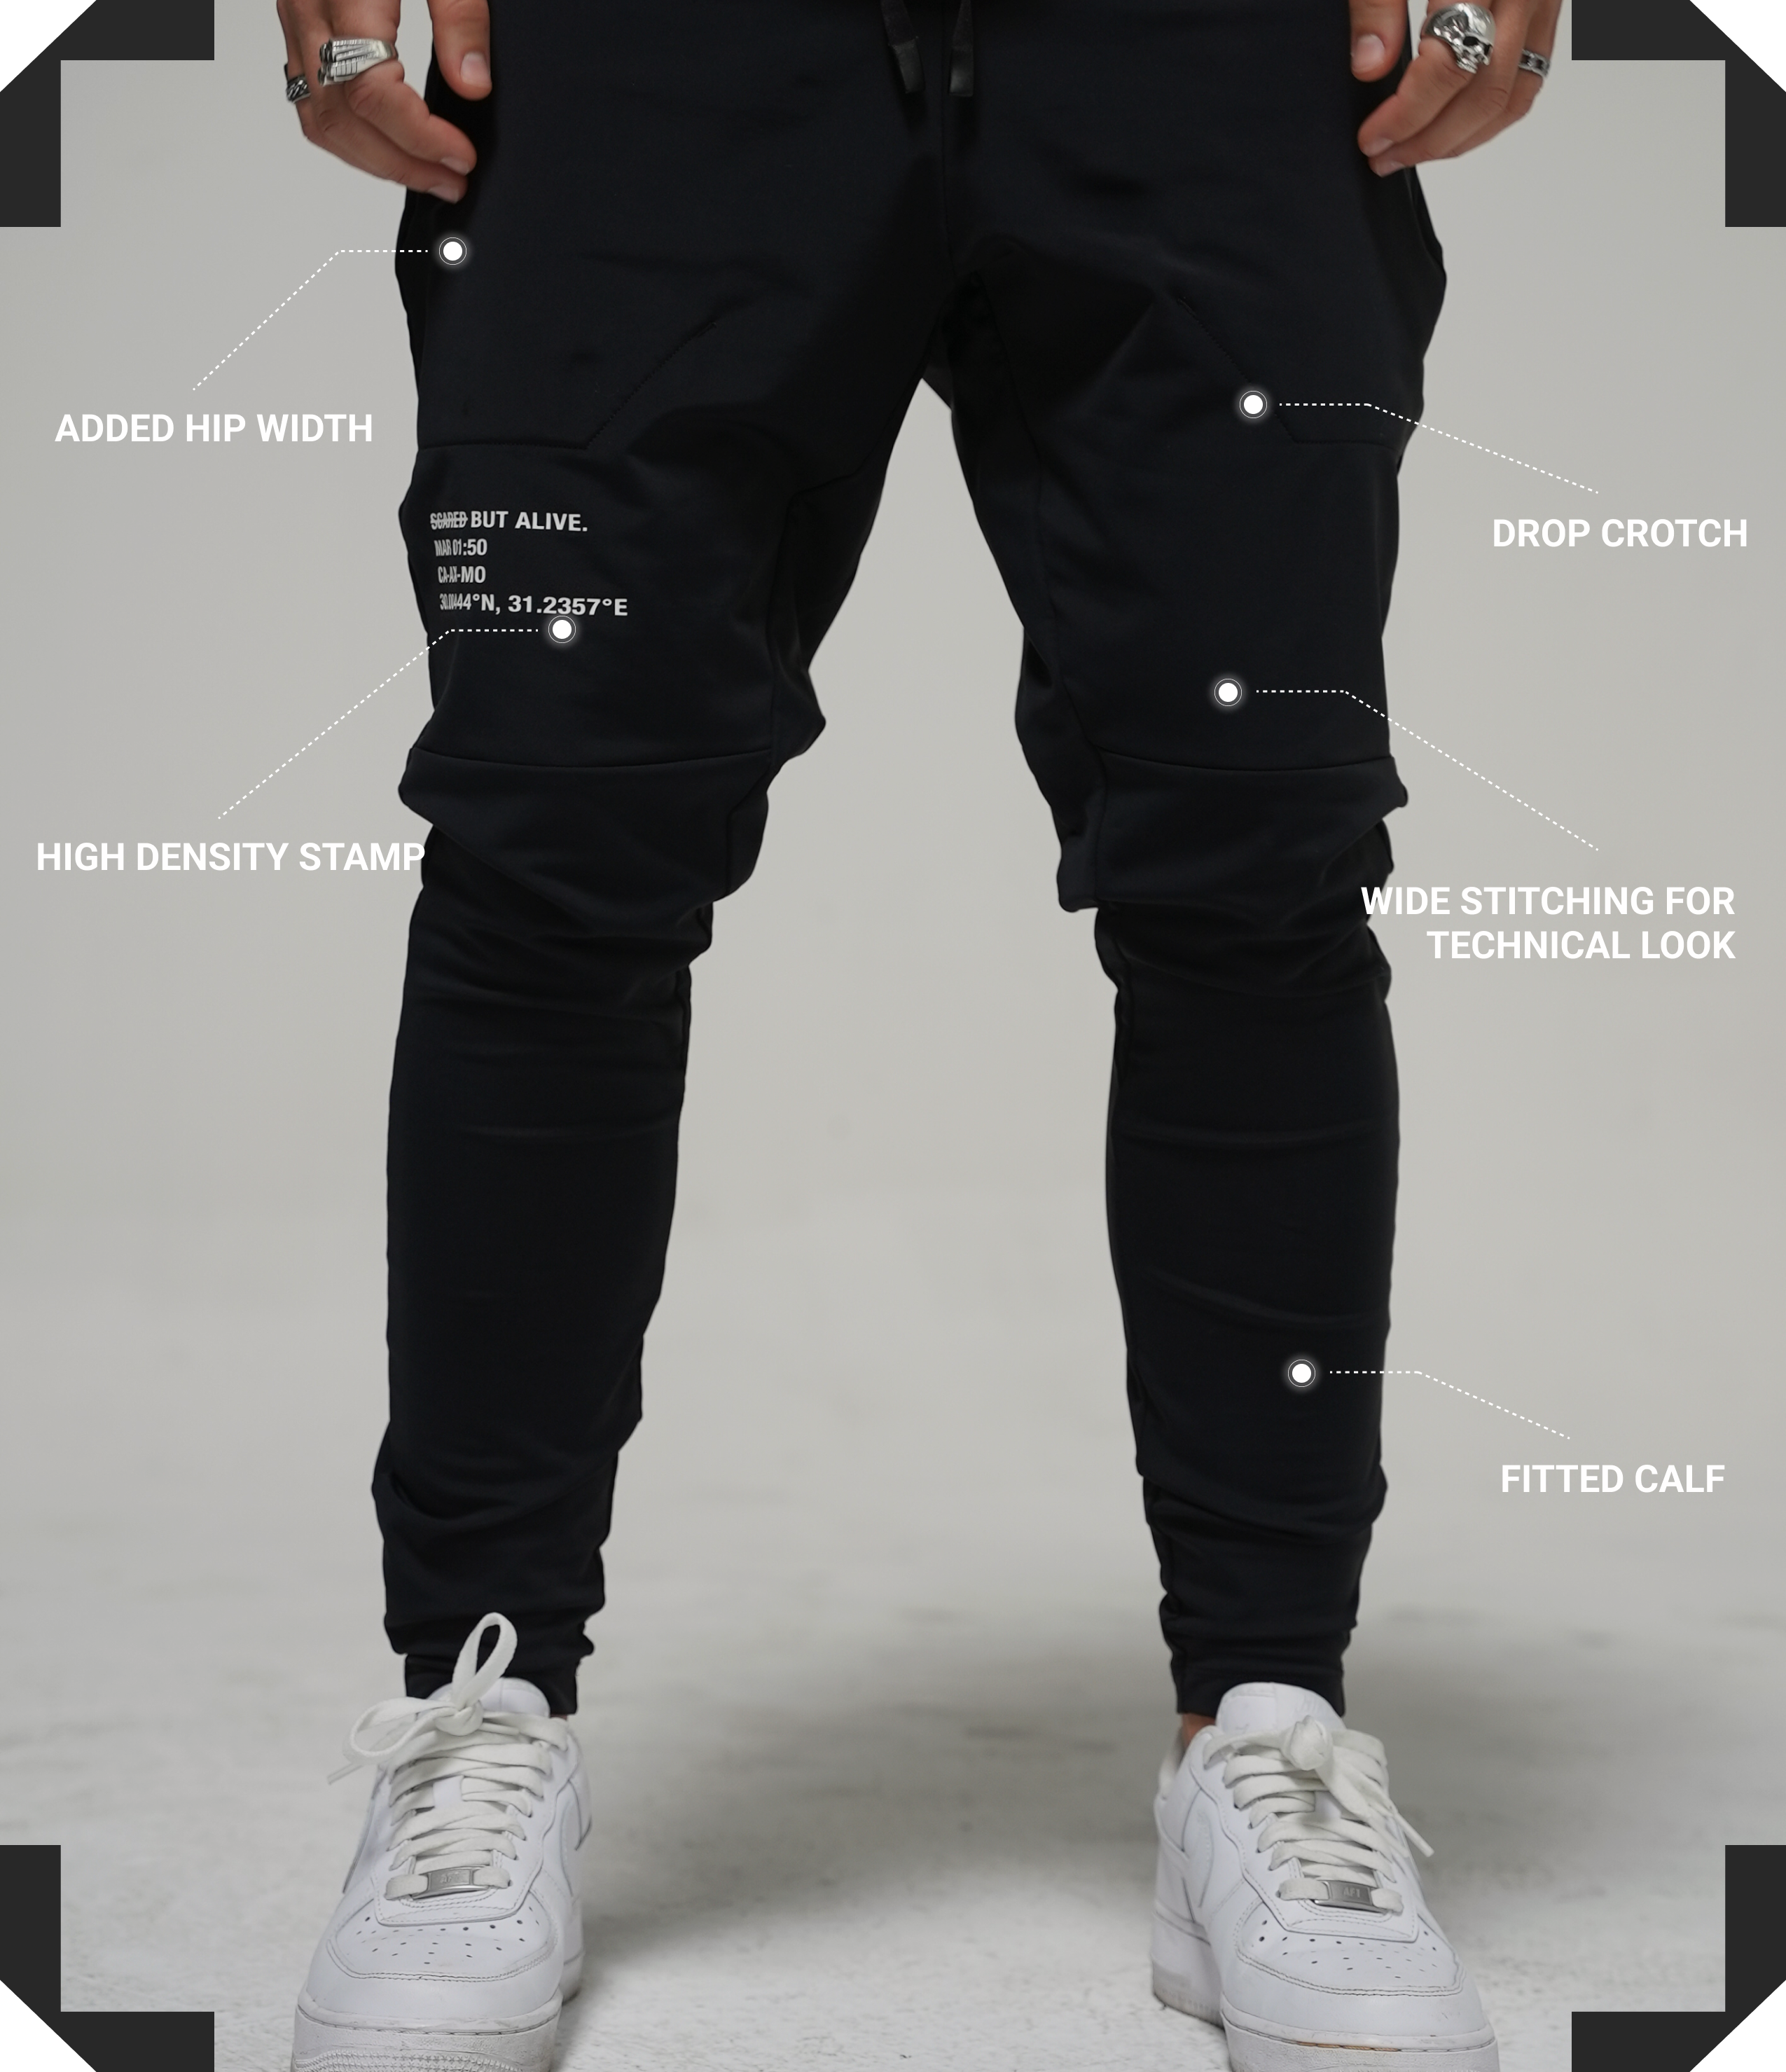 Tokyo Jogger - front view on model with specs: added hip width, high density stamp, drop crotch, wide stitching for technical look, fitted calf